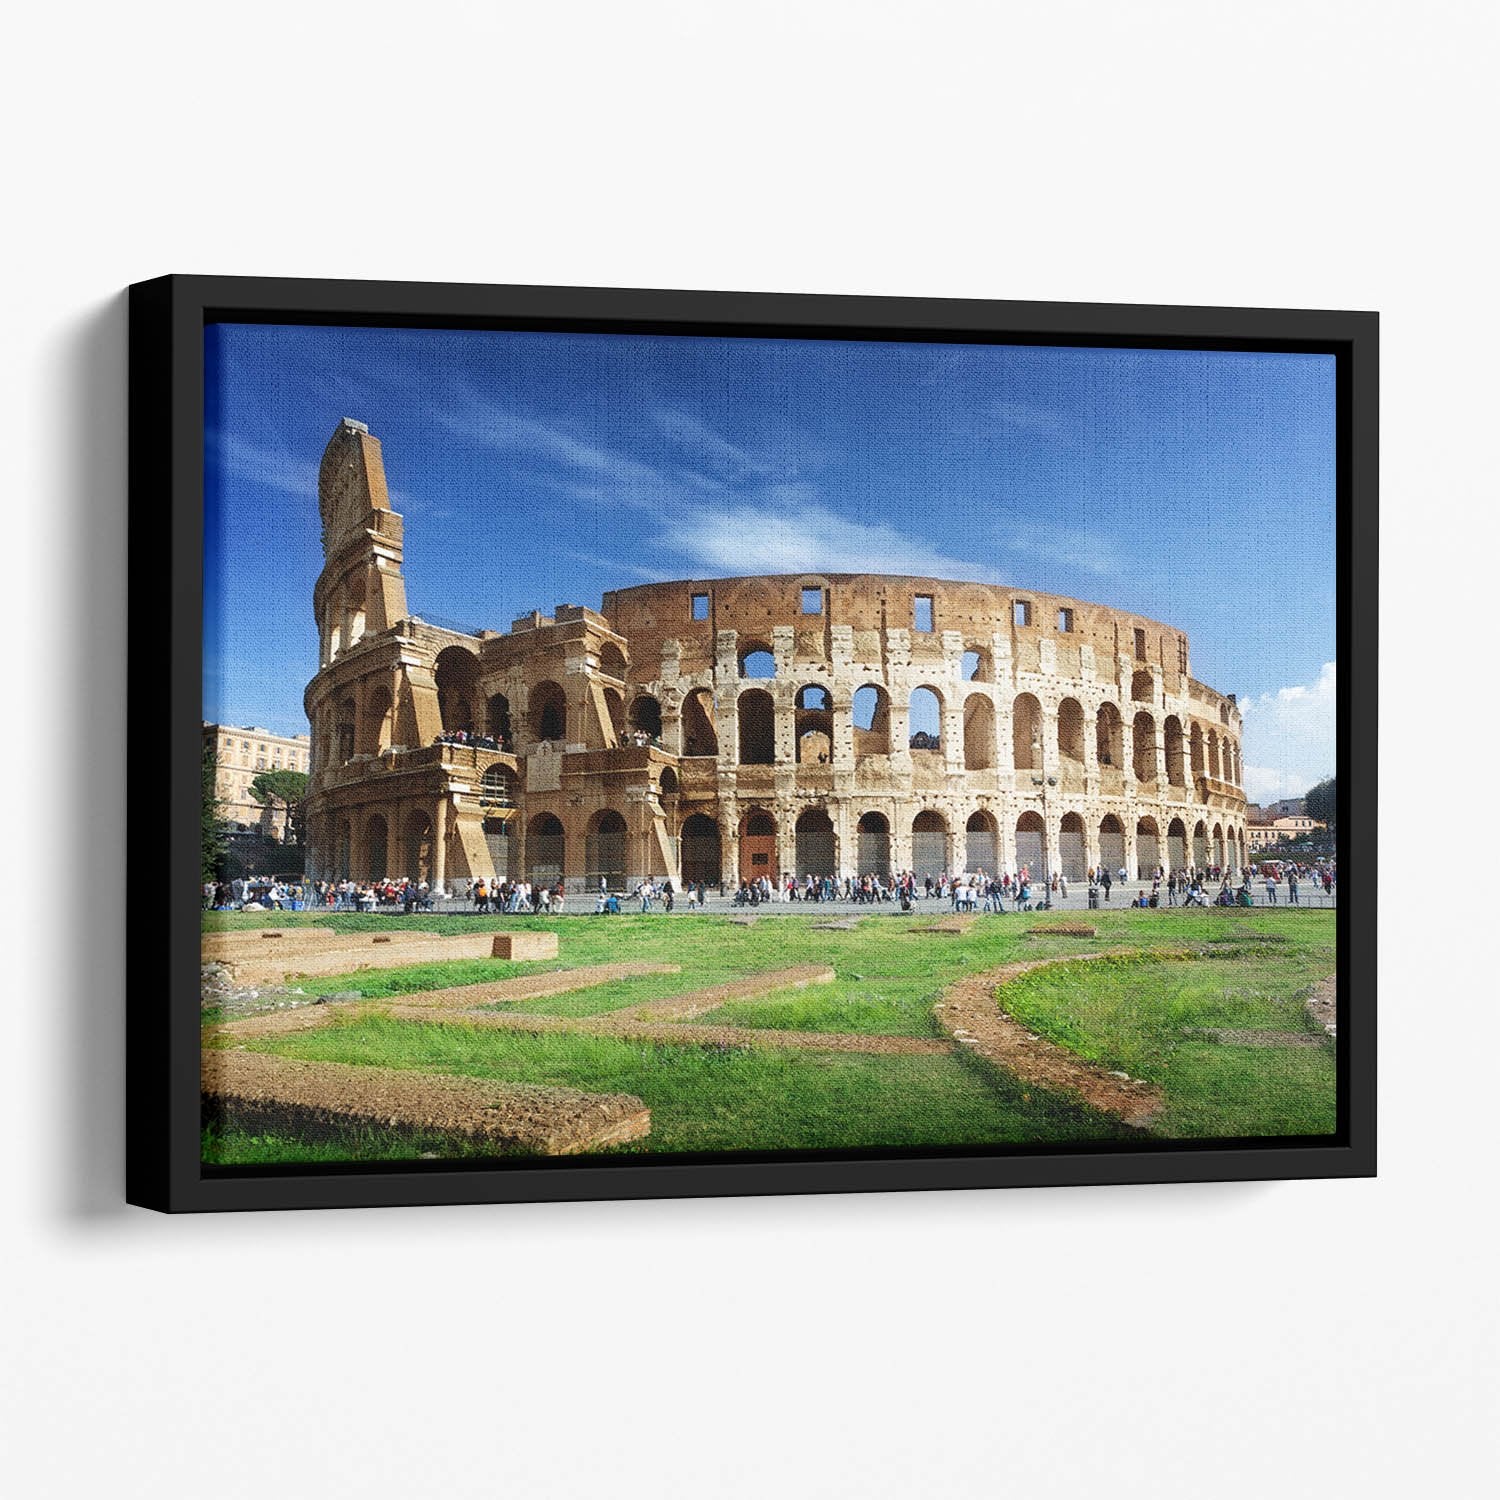 Colosseum in Rome Italy Floating Framed Canvas